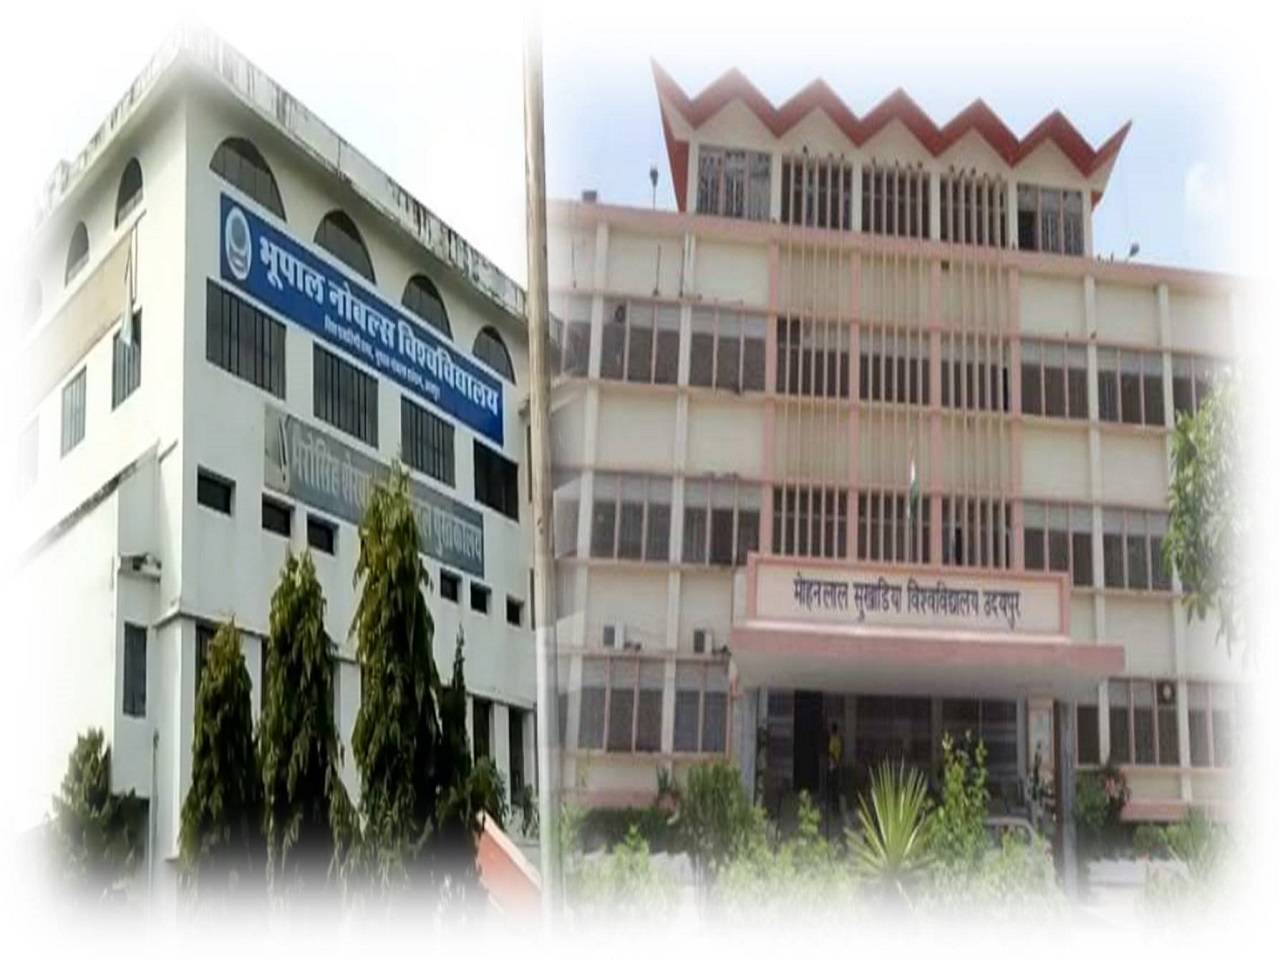 BN and MLSU - two of the premier universities of Udaipur will conduct exams from next week